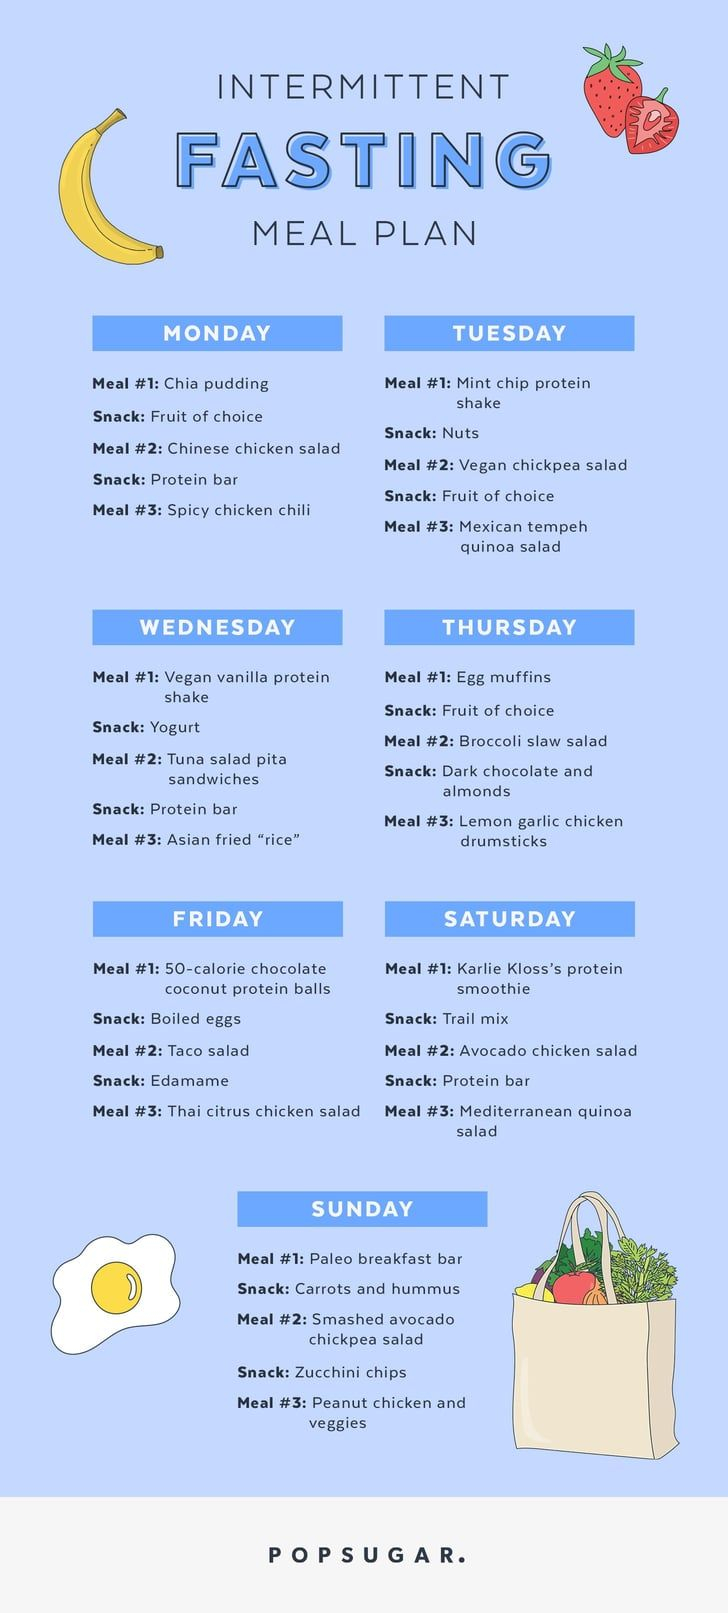 Want To Try Out Intermittent Fasting Here s A 1 Week Kick Start Plan  - Intermittent Fasting Meal Plan 18/6